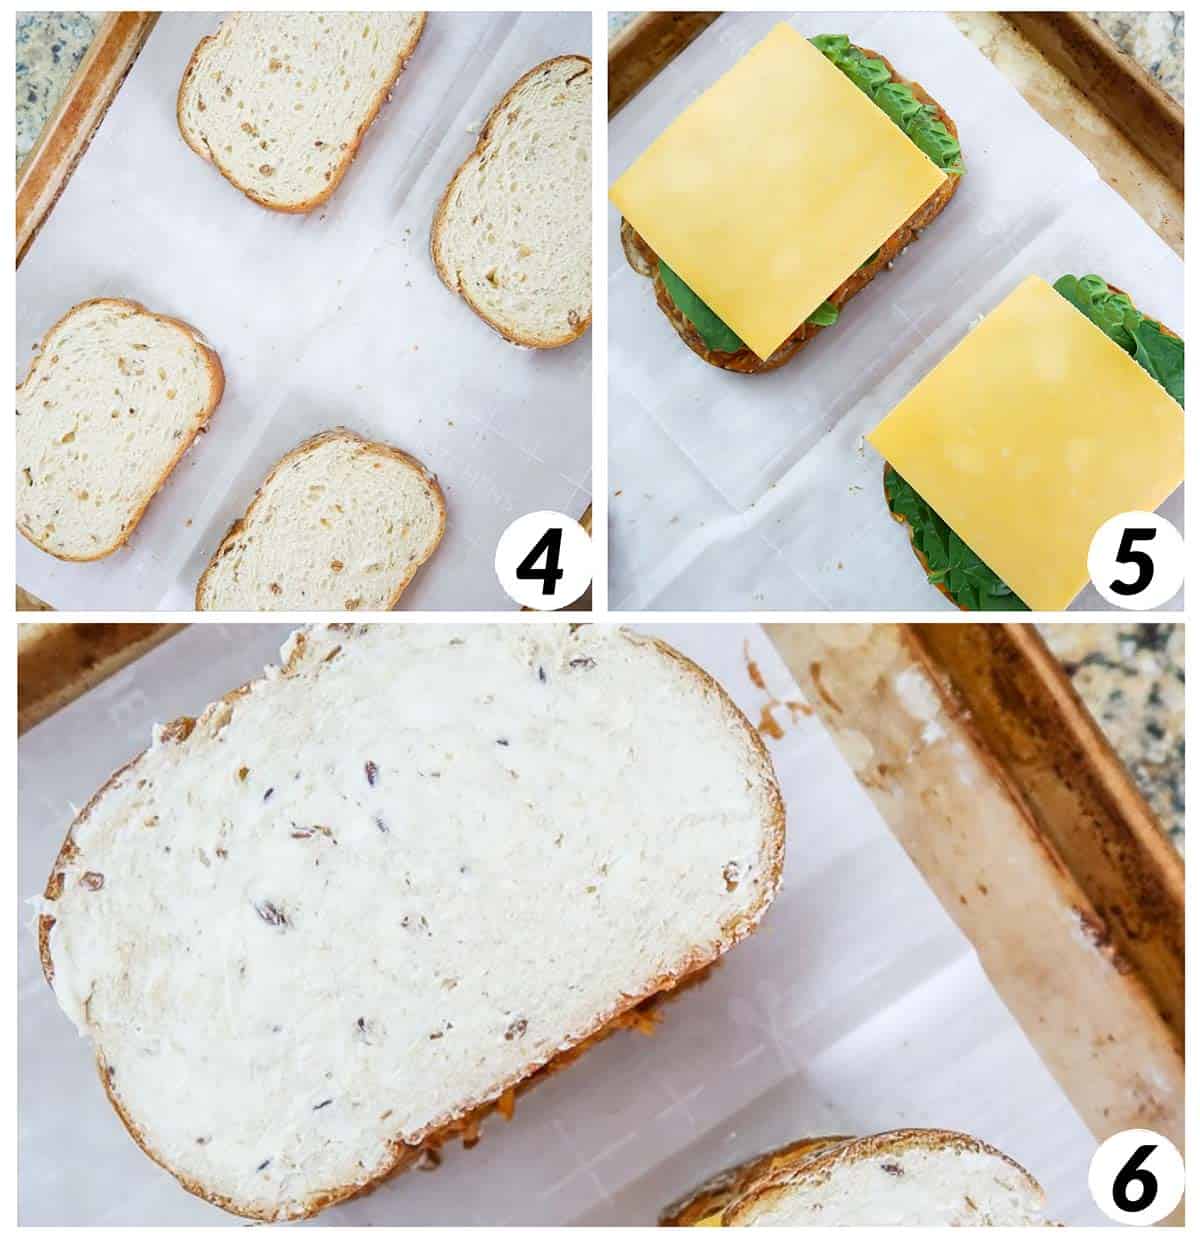 Three panel grid of process shots 4-6 - assembling sandwiches on baking sheet and baking in the oven.